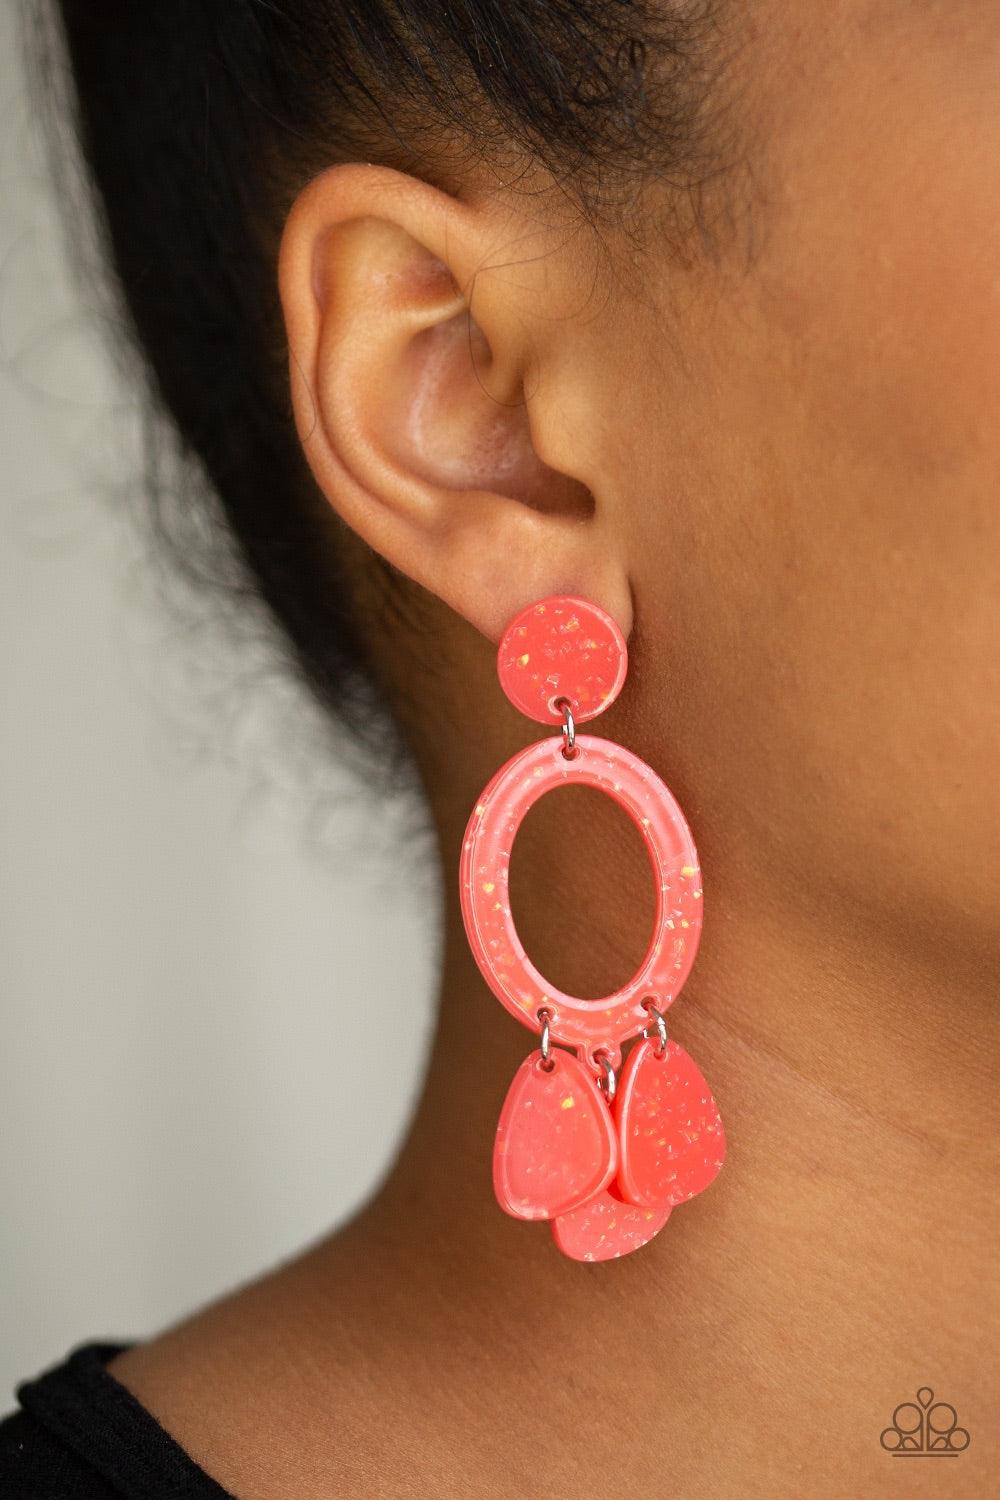 Paparazzi Accessories Sparkling Shores - Orange Sparkle flecked coral acrylic frames link into an abstract lure for a summery look. Earring attaches to a standard post fitting. Jewelry